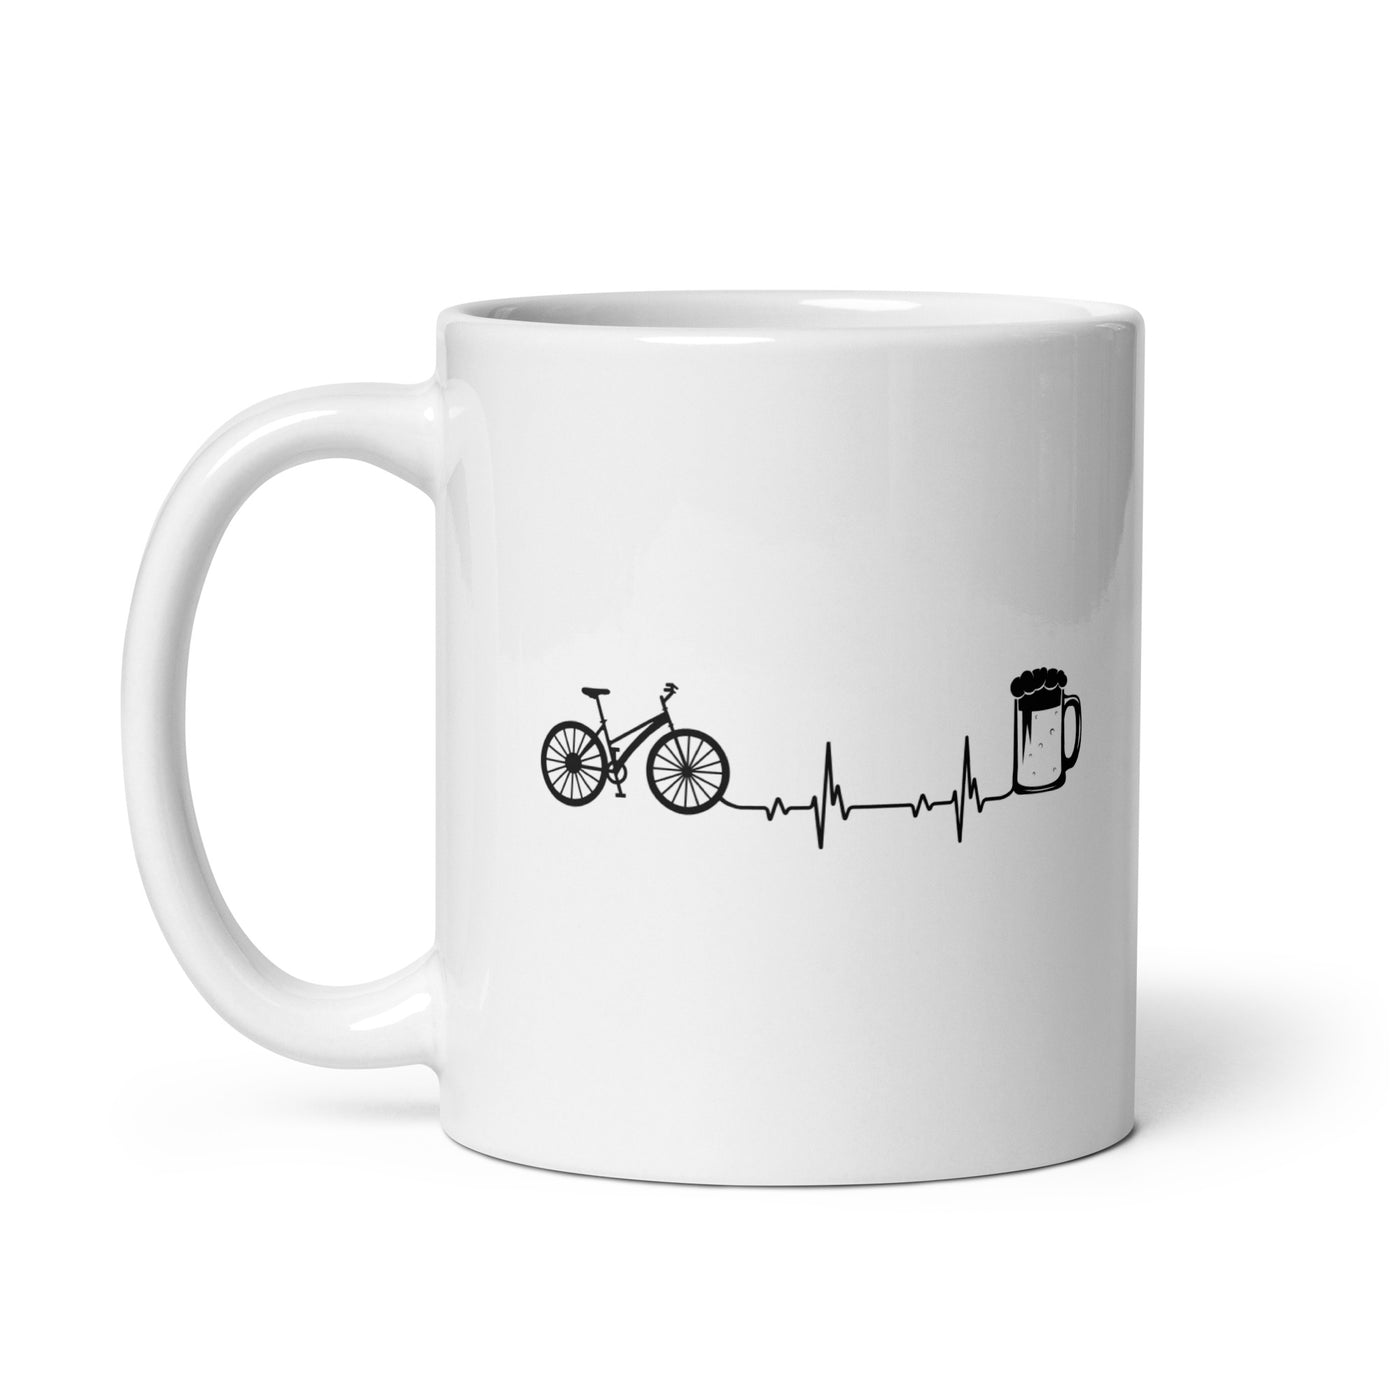 Heartbeat Beer And Bicycle - Tasse fahrrad 11oz